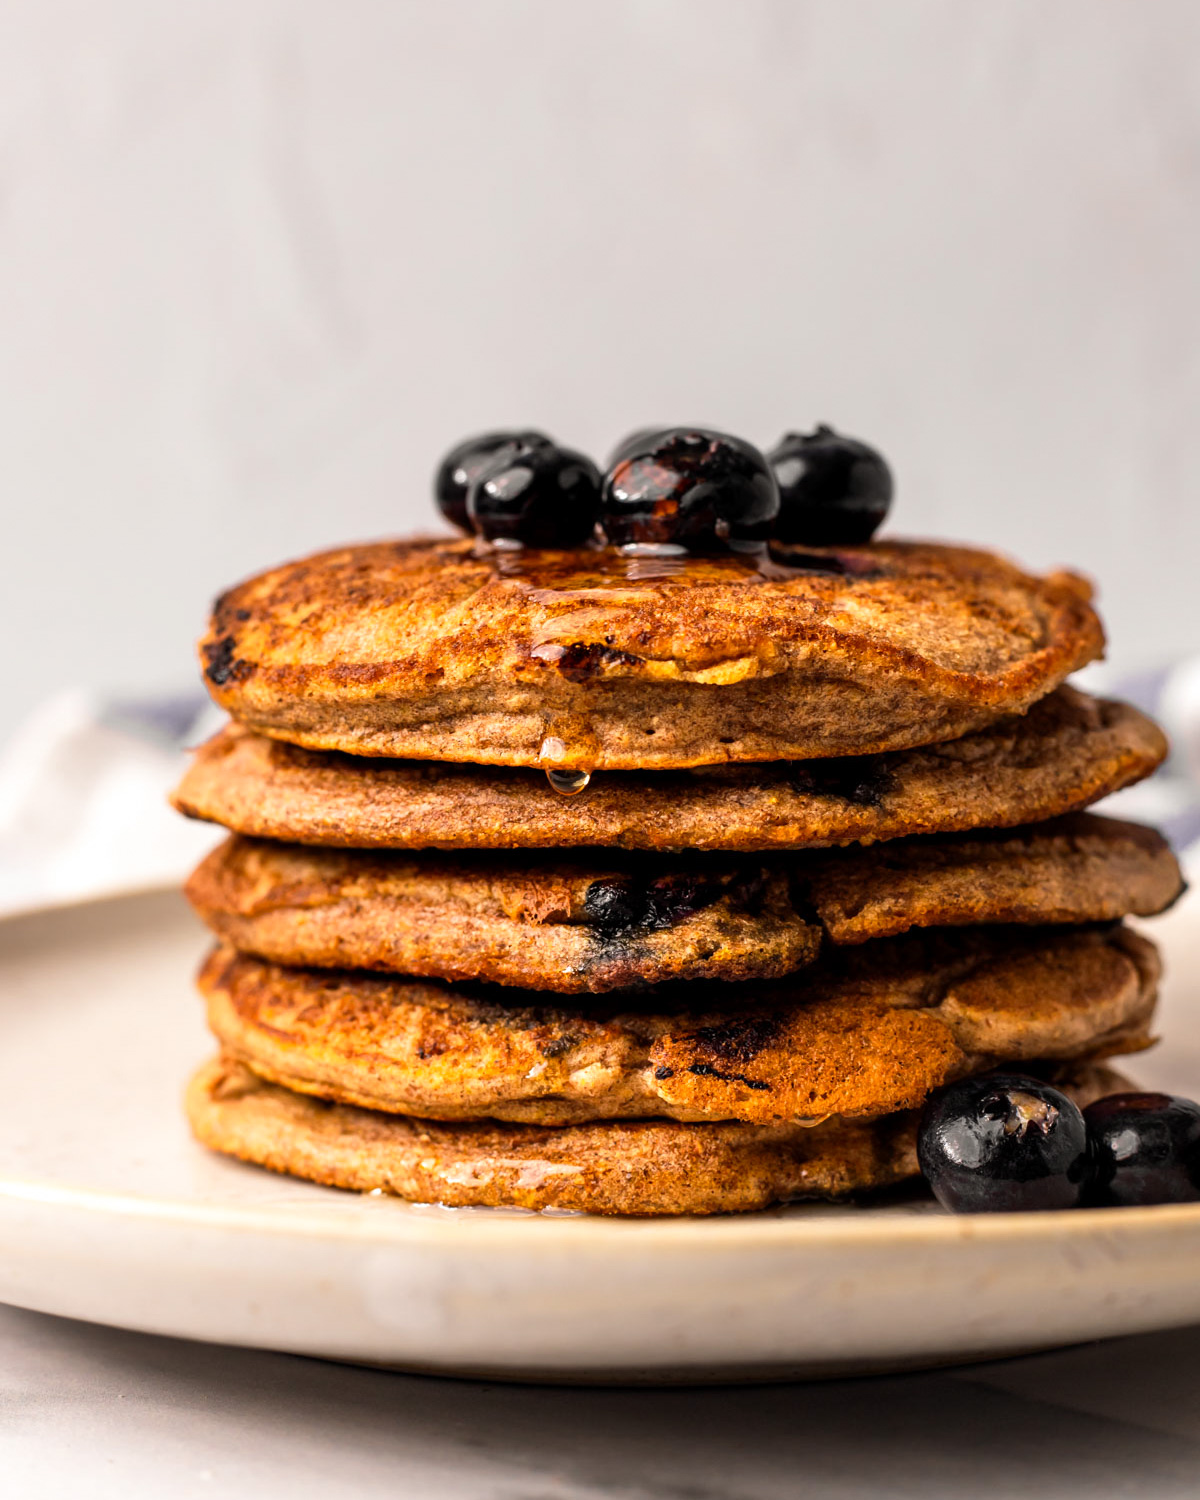 A side shot of a stack of vegan blueberry pancakes with a bit of maple syrup on top.